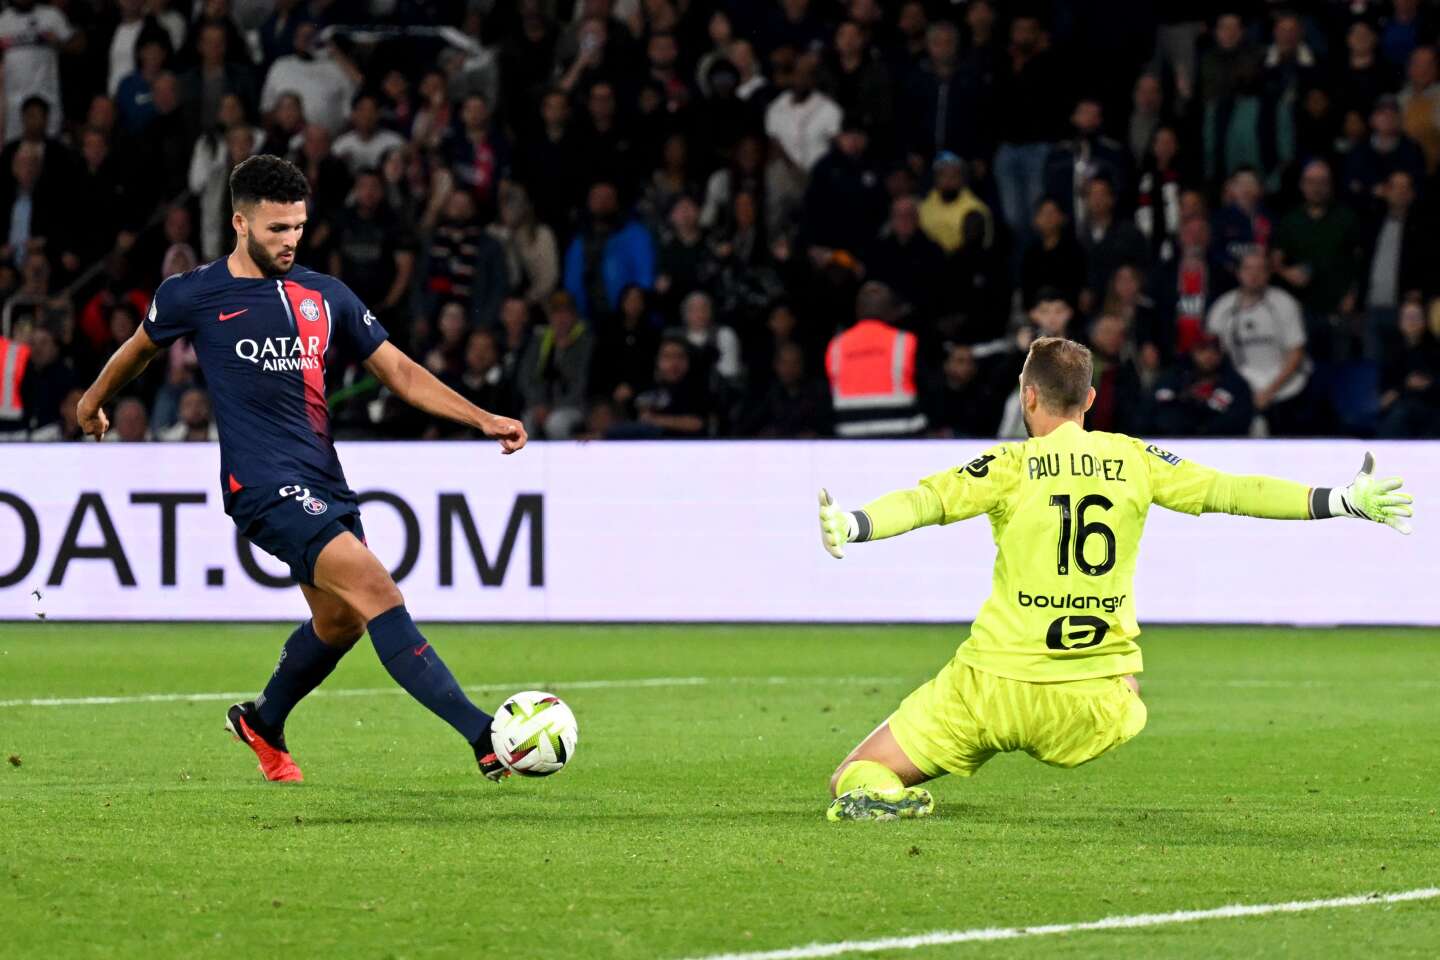 PSG crushes Marseille (4-0) in a one-sided “classic”